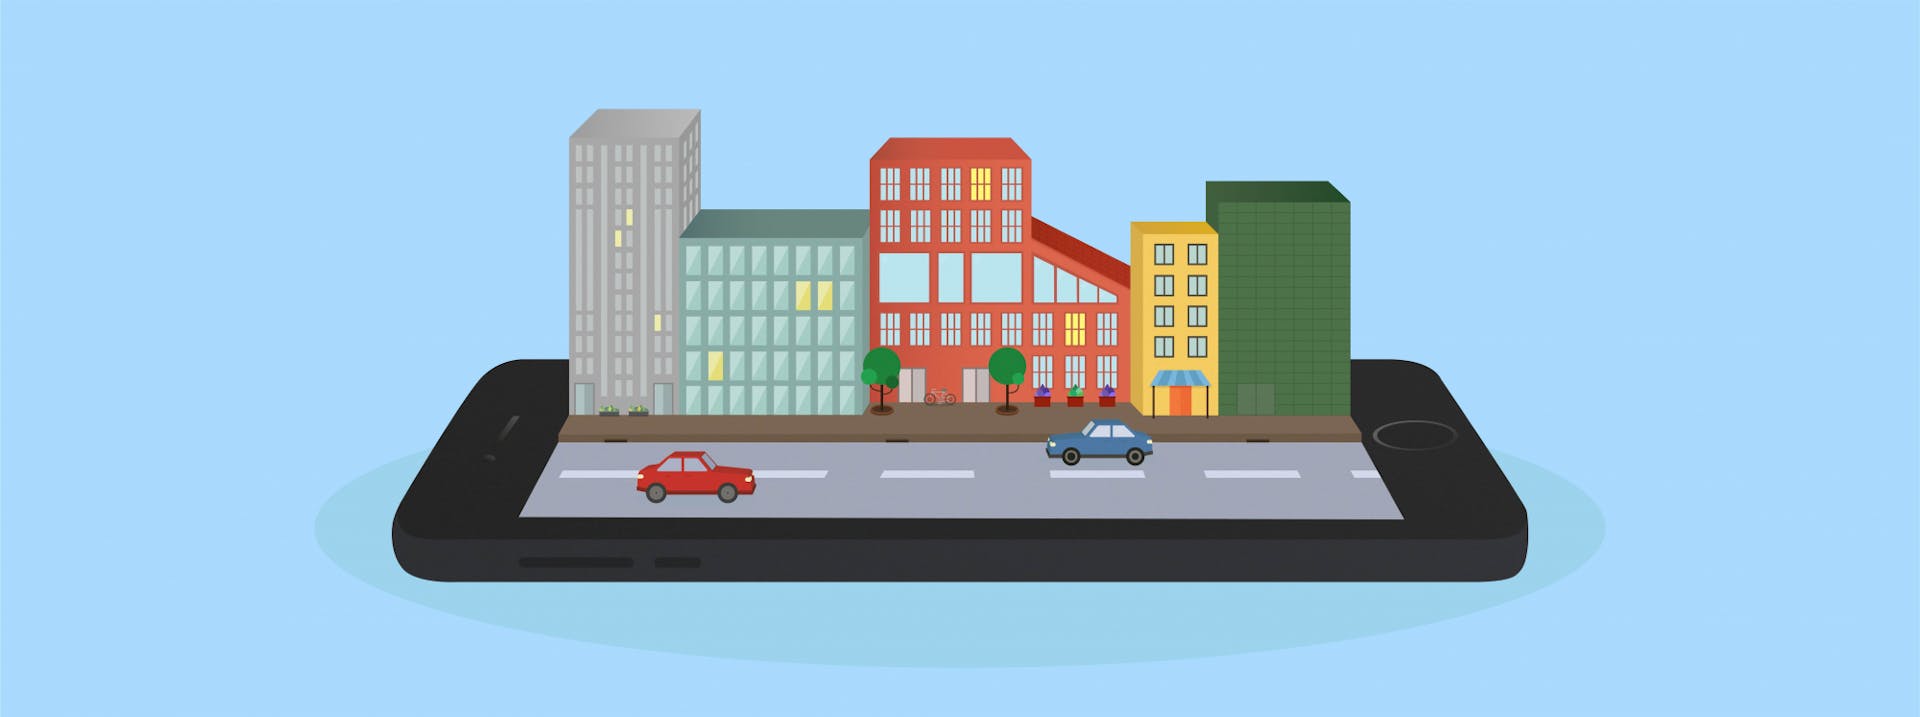 Illustration of an urban street popping out of a smartphone screen, with colourful buildings and cars driving along the road